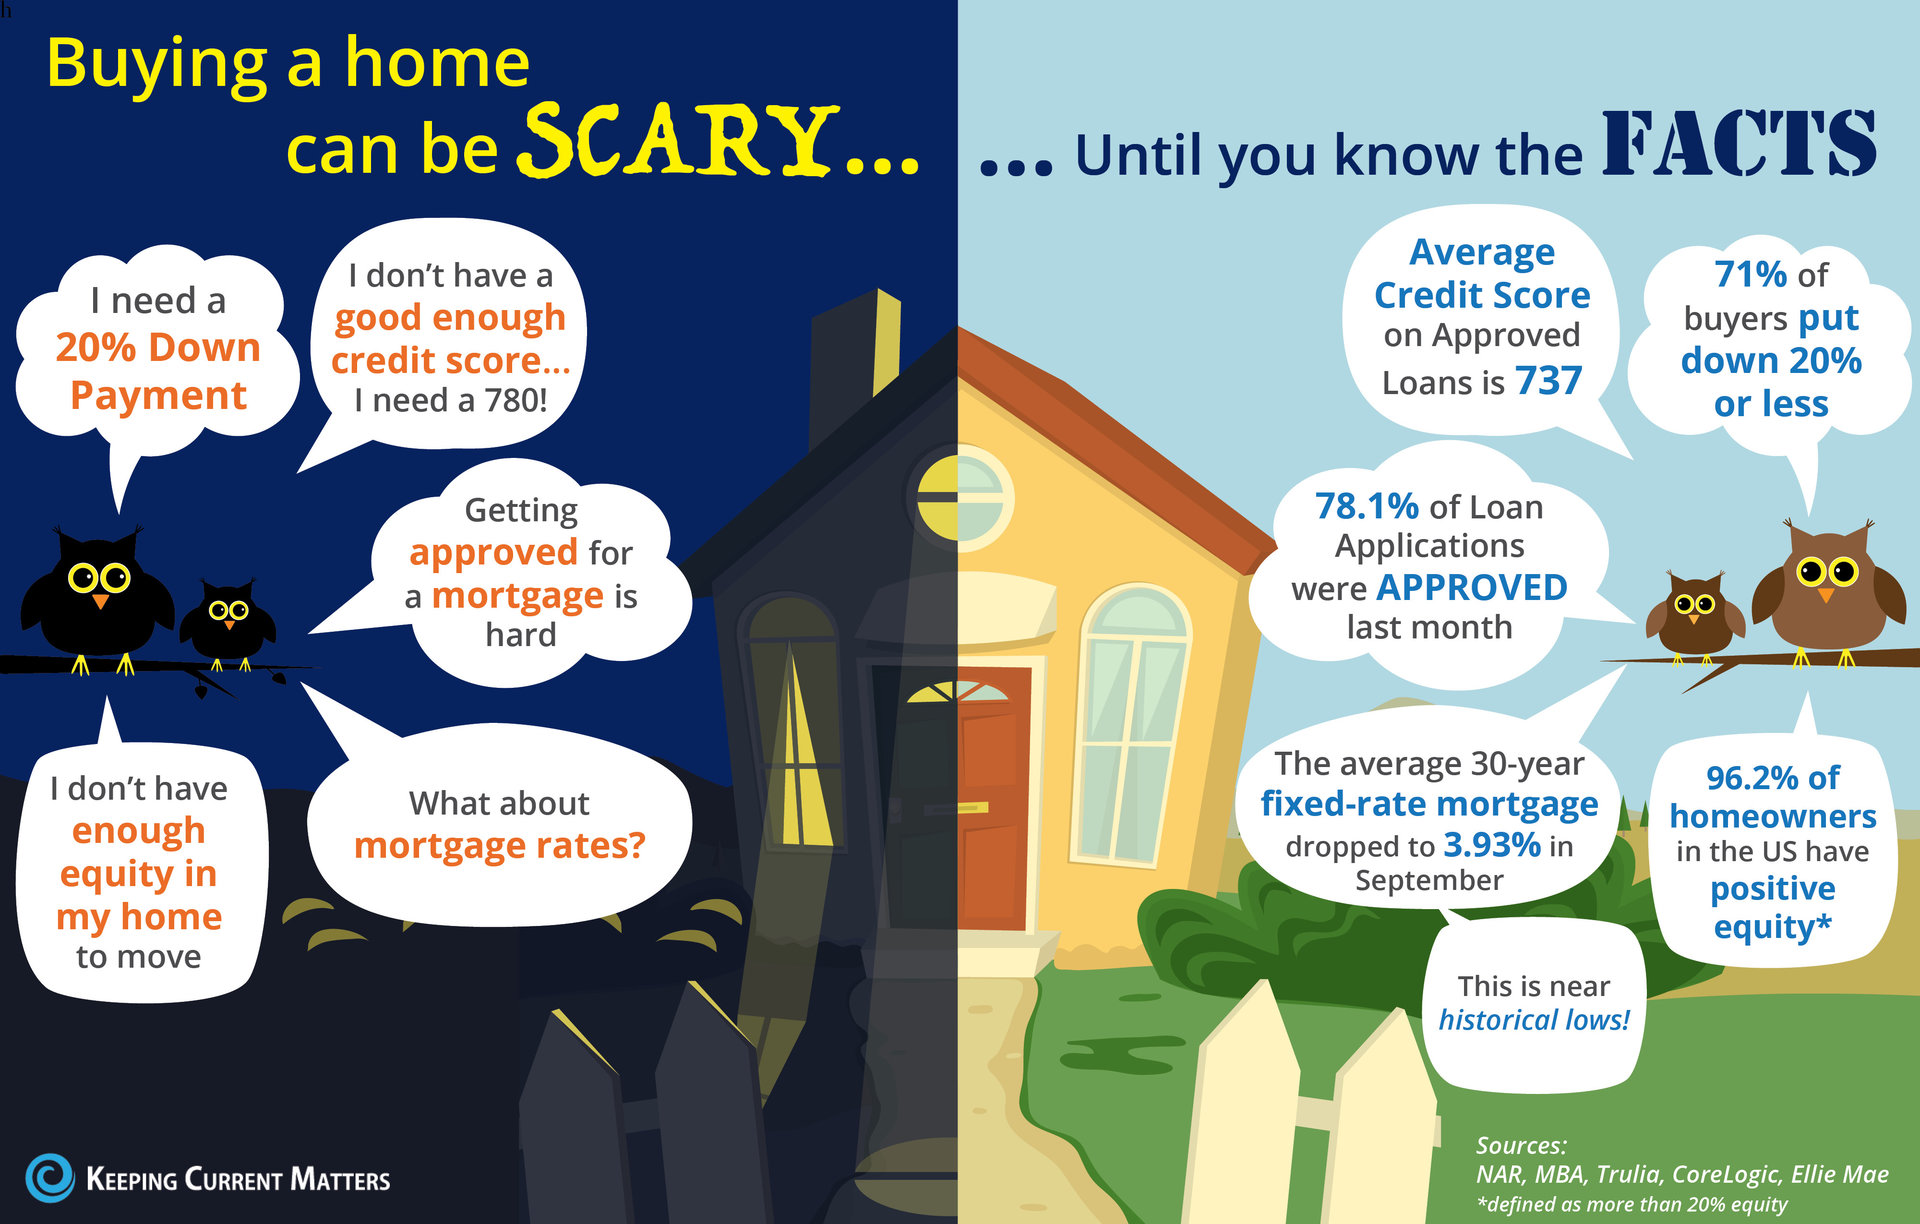 Buying a home can be SCARY…Until you know the FACTS [INFOGRAPHIC] | Keeping Current Matters